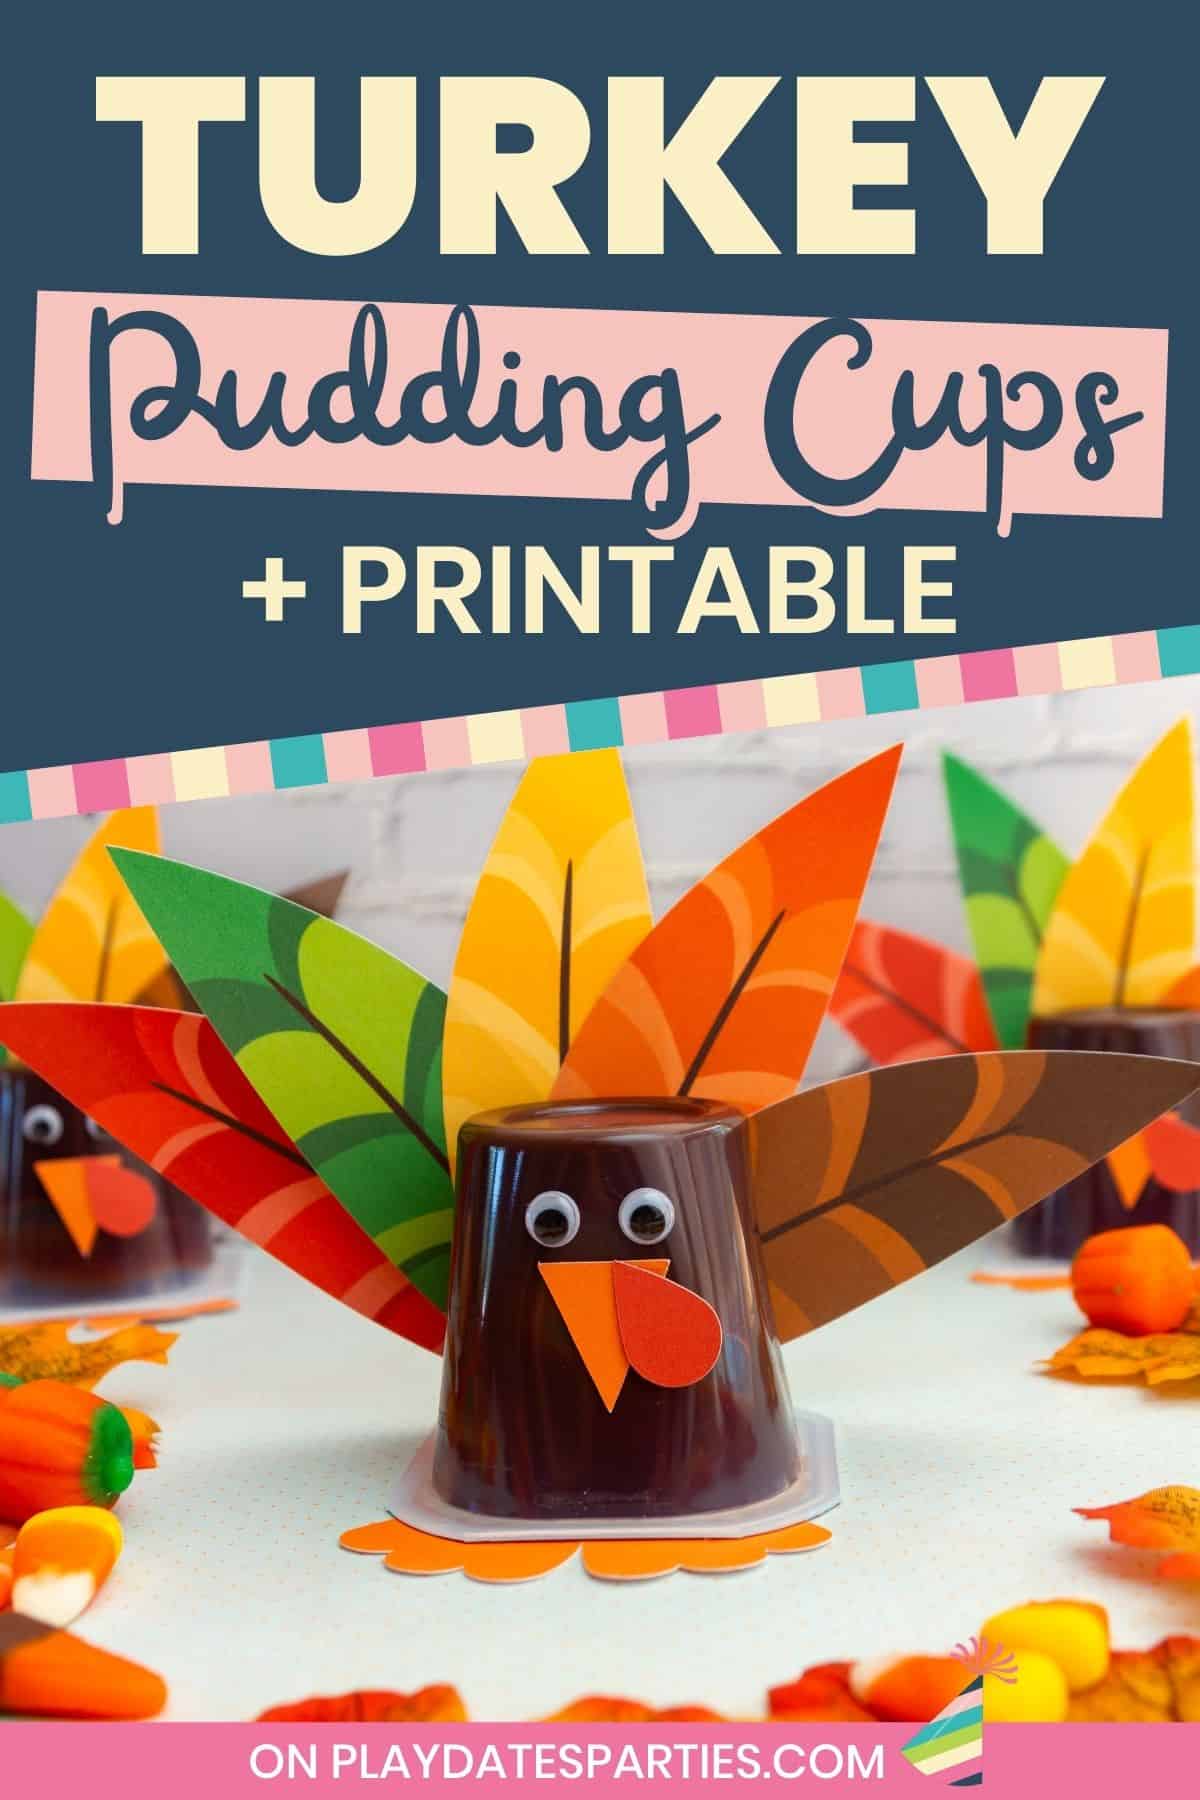 Front view of turkey pudding cups on a table surrounded by fall leaves and candy corn.